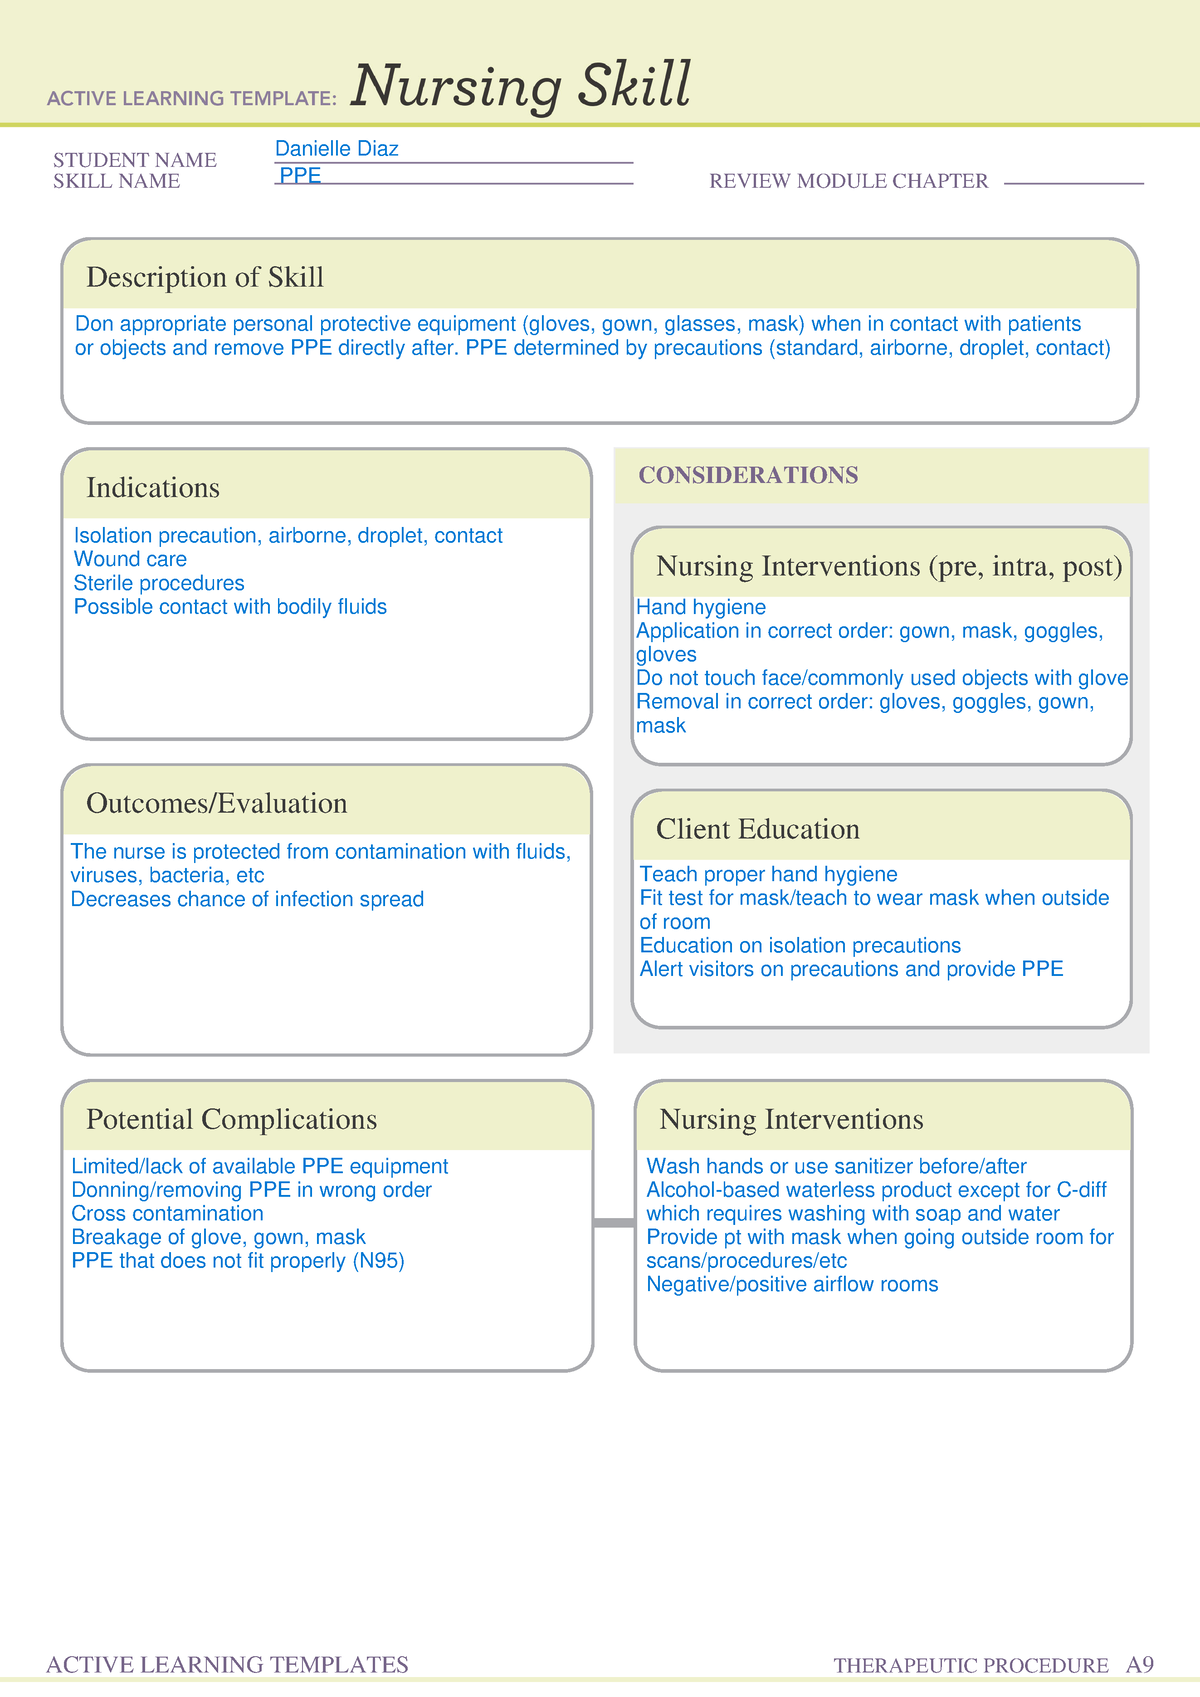 PPE Nursing Skill active learning template ATI remediation STUDENT